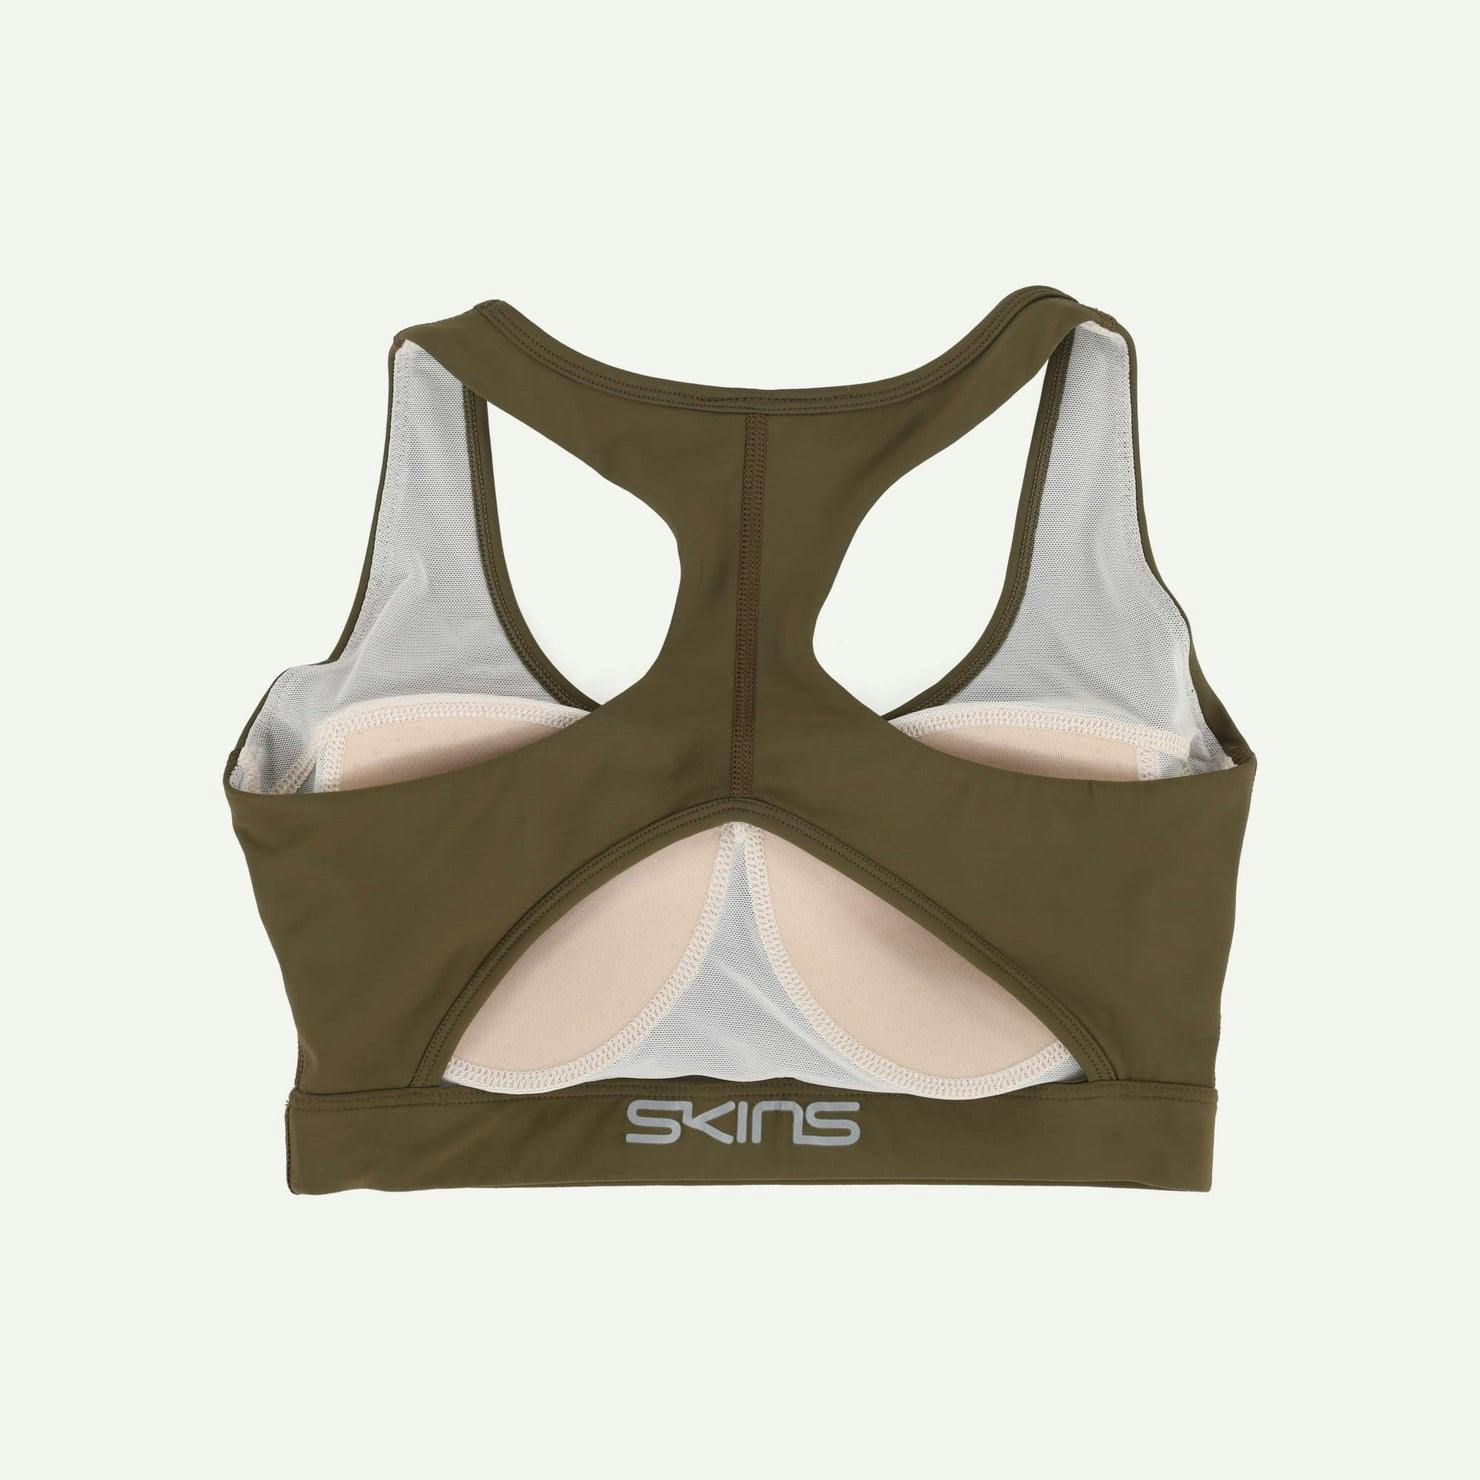 SKINS Compression As new Olive Series 3 Sports Bra